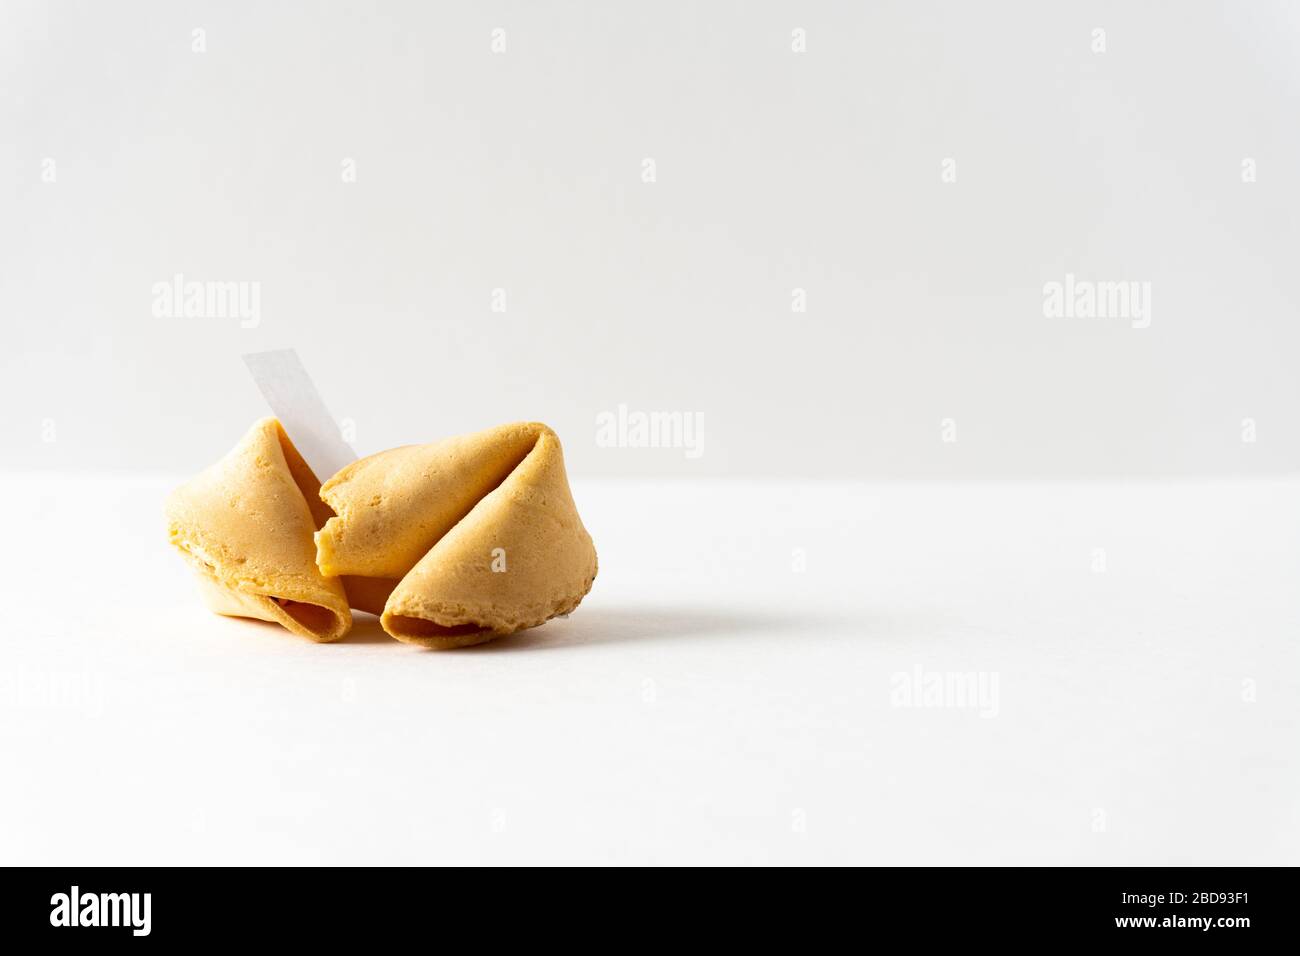 Two fortune cookies on a bright white background with a blank space for a fortune and copy space; landscape view Stock Photo